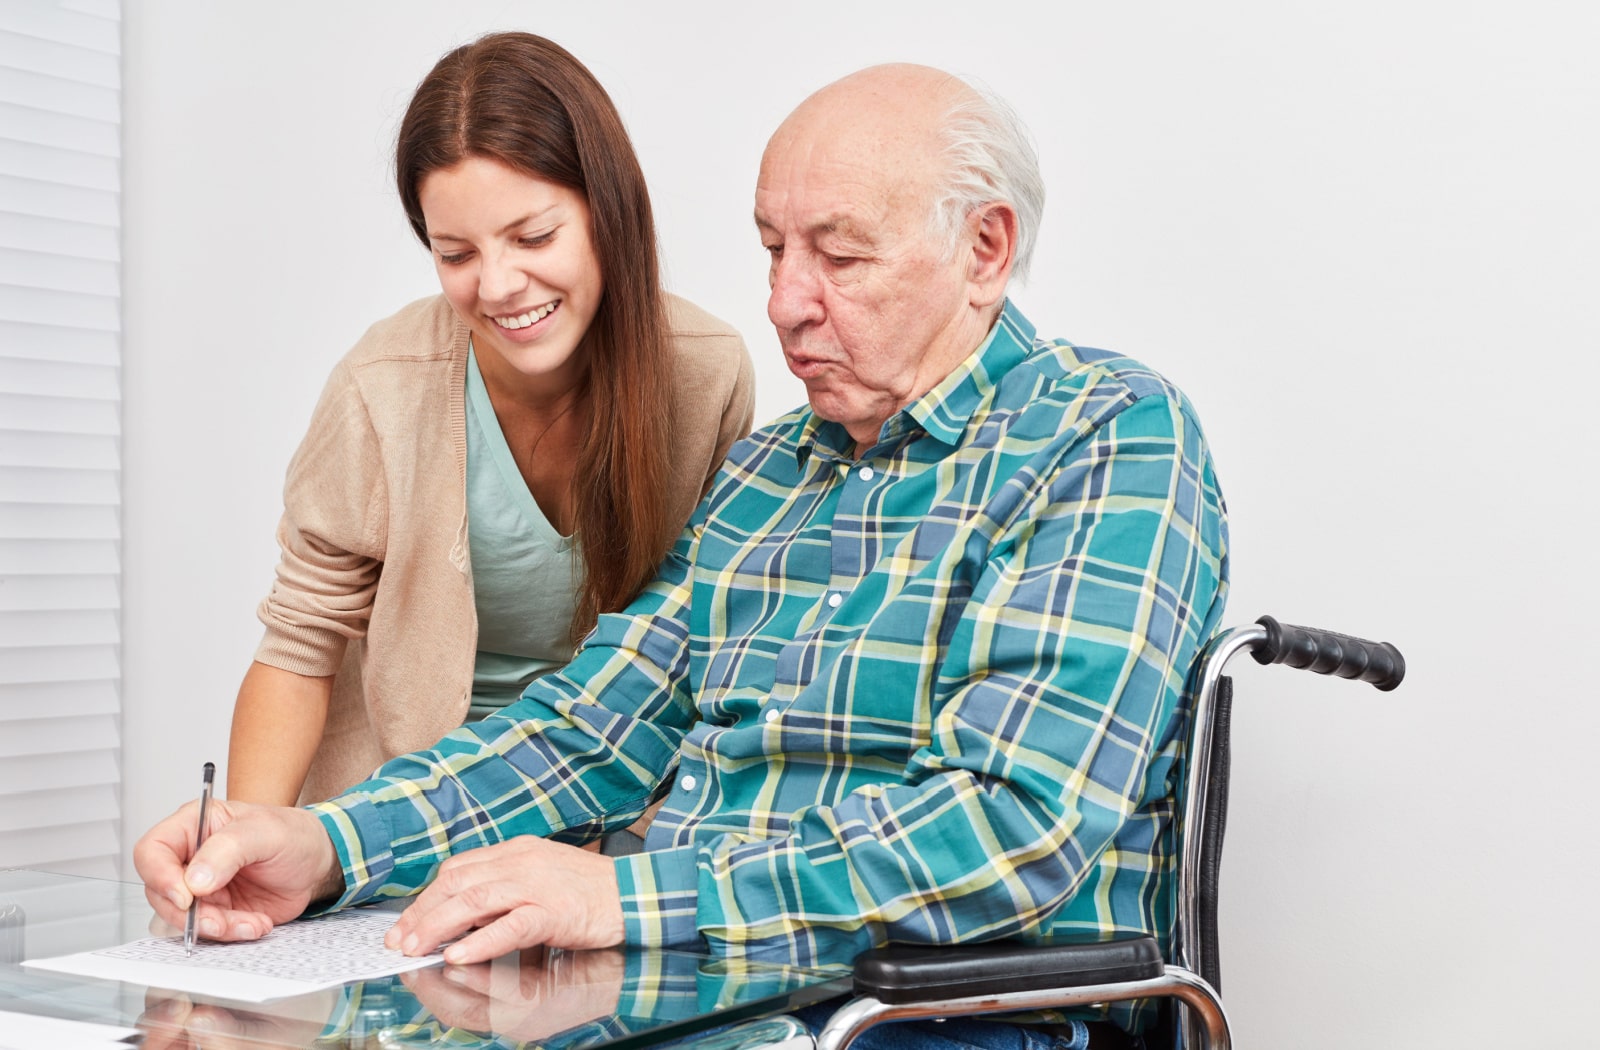 A female nurse talks to a memory care resident as he works on a puzzle